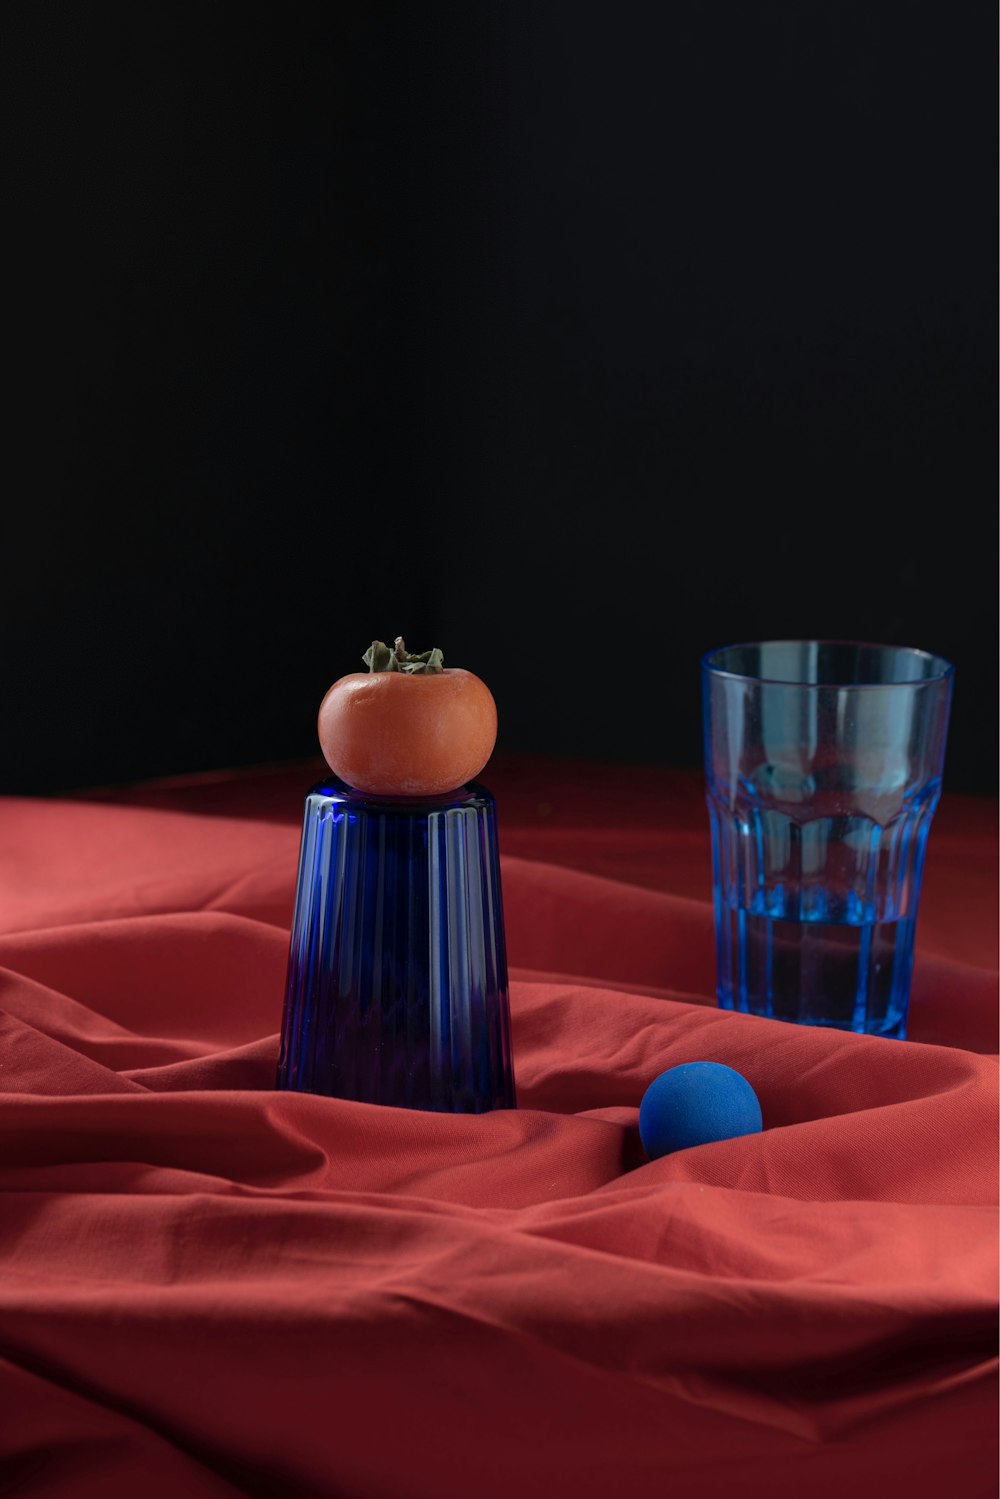 a blue glass and a tomato on a red cloth